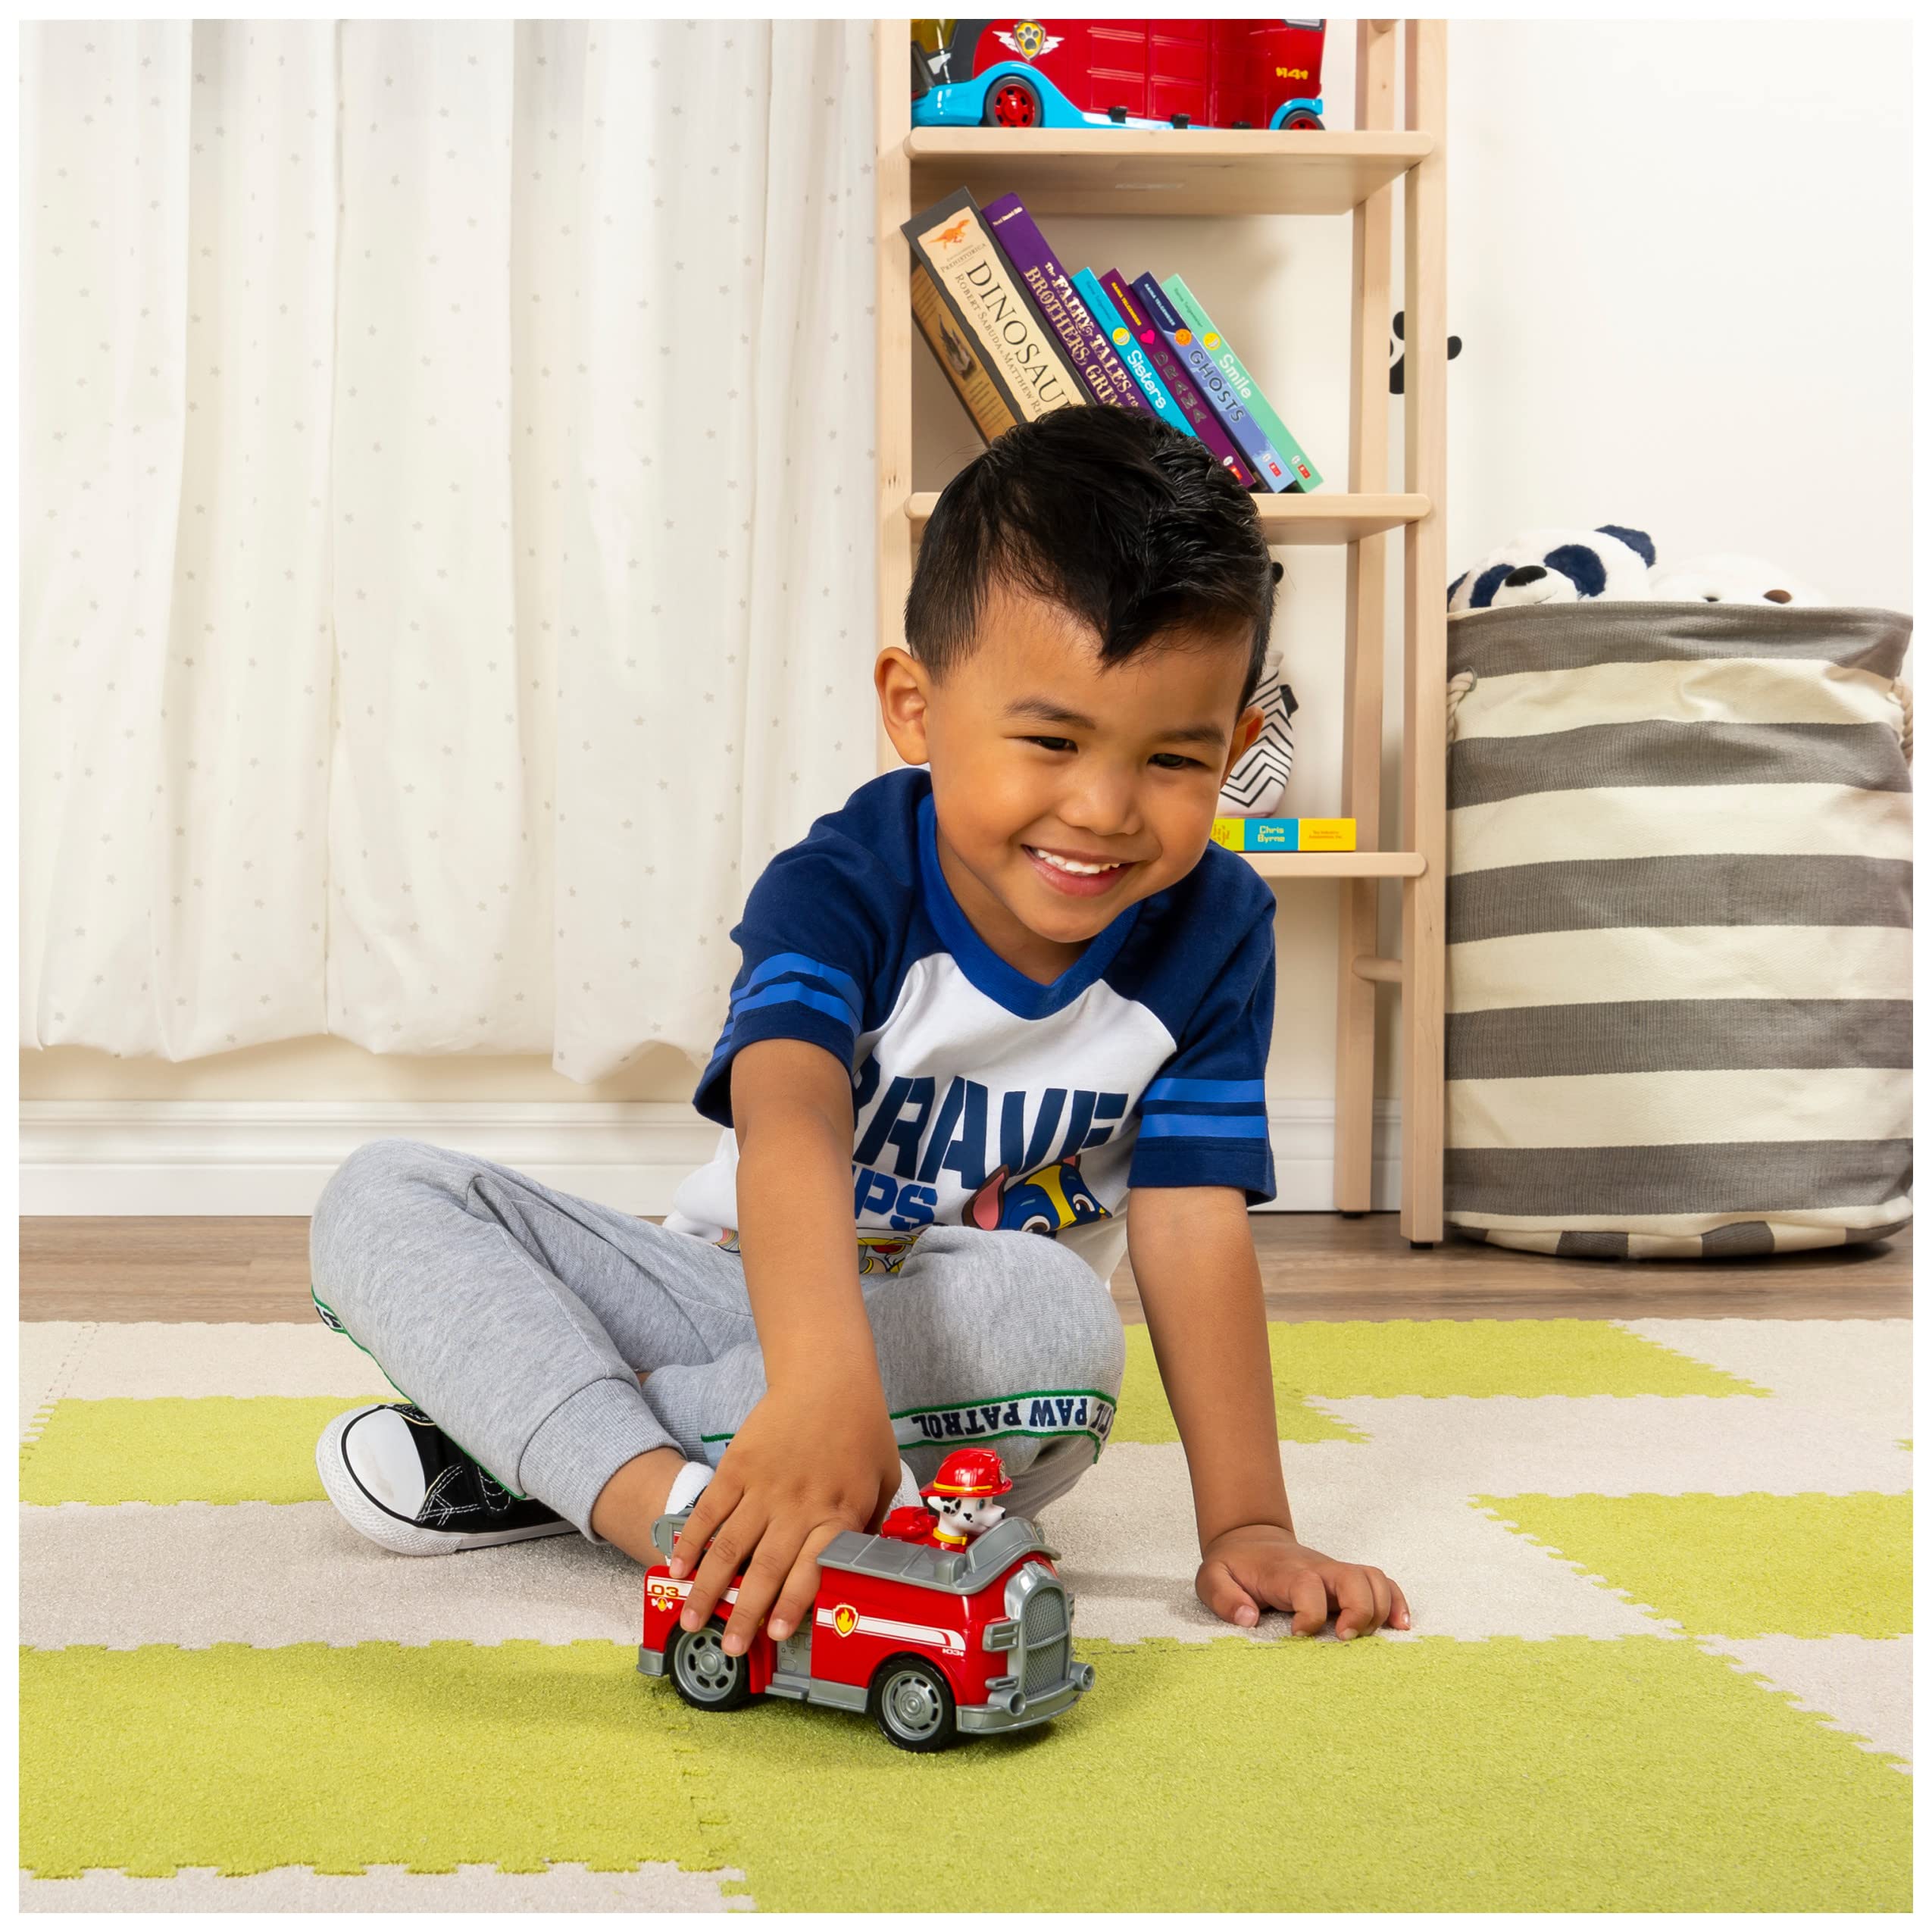 Paw Patrol, Marshall’s Fire Engine Vehicle with Collectible Figure, for Kids Aged 3 and Up